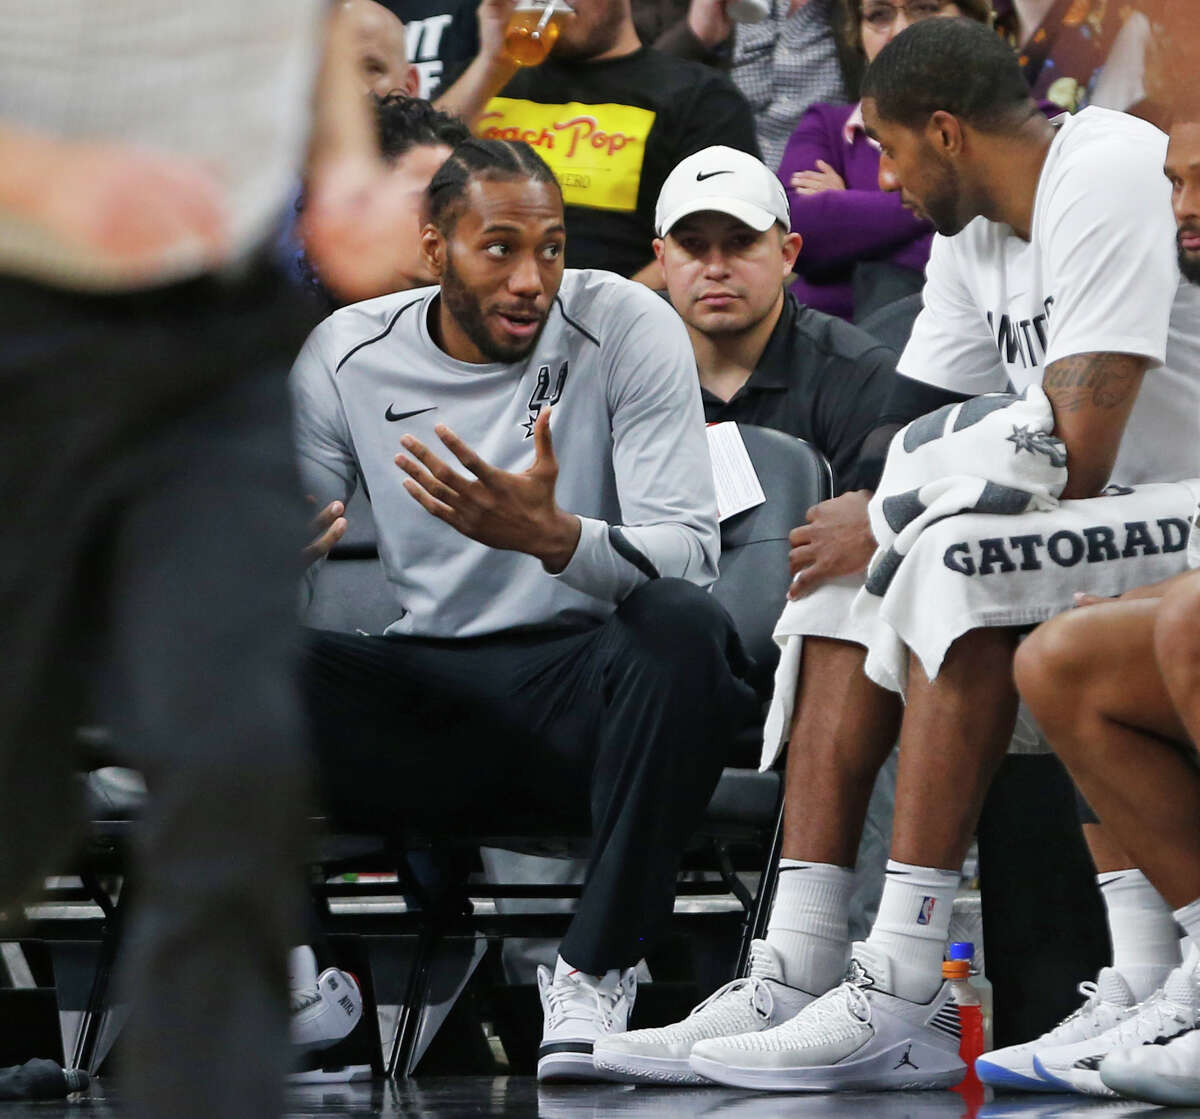 FILE PHOTO: Kawhi Leonard #2 of the San Antonio Spurs still not playing talks with teammate LaMarcus Aldridge #12 of the San Antonio Spurs during game against the Orlando Magic at AT&T Center on March 13, 2018 in San Antonio, Texas. NOTE TO USER: User expressly acknowledges and agrees that , by downloading and or using this photograph, User is consenting to the terms and conditions of the Getty Images License Agreement. (Photo by Ronald Cortes/Getty Images)